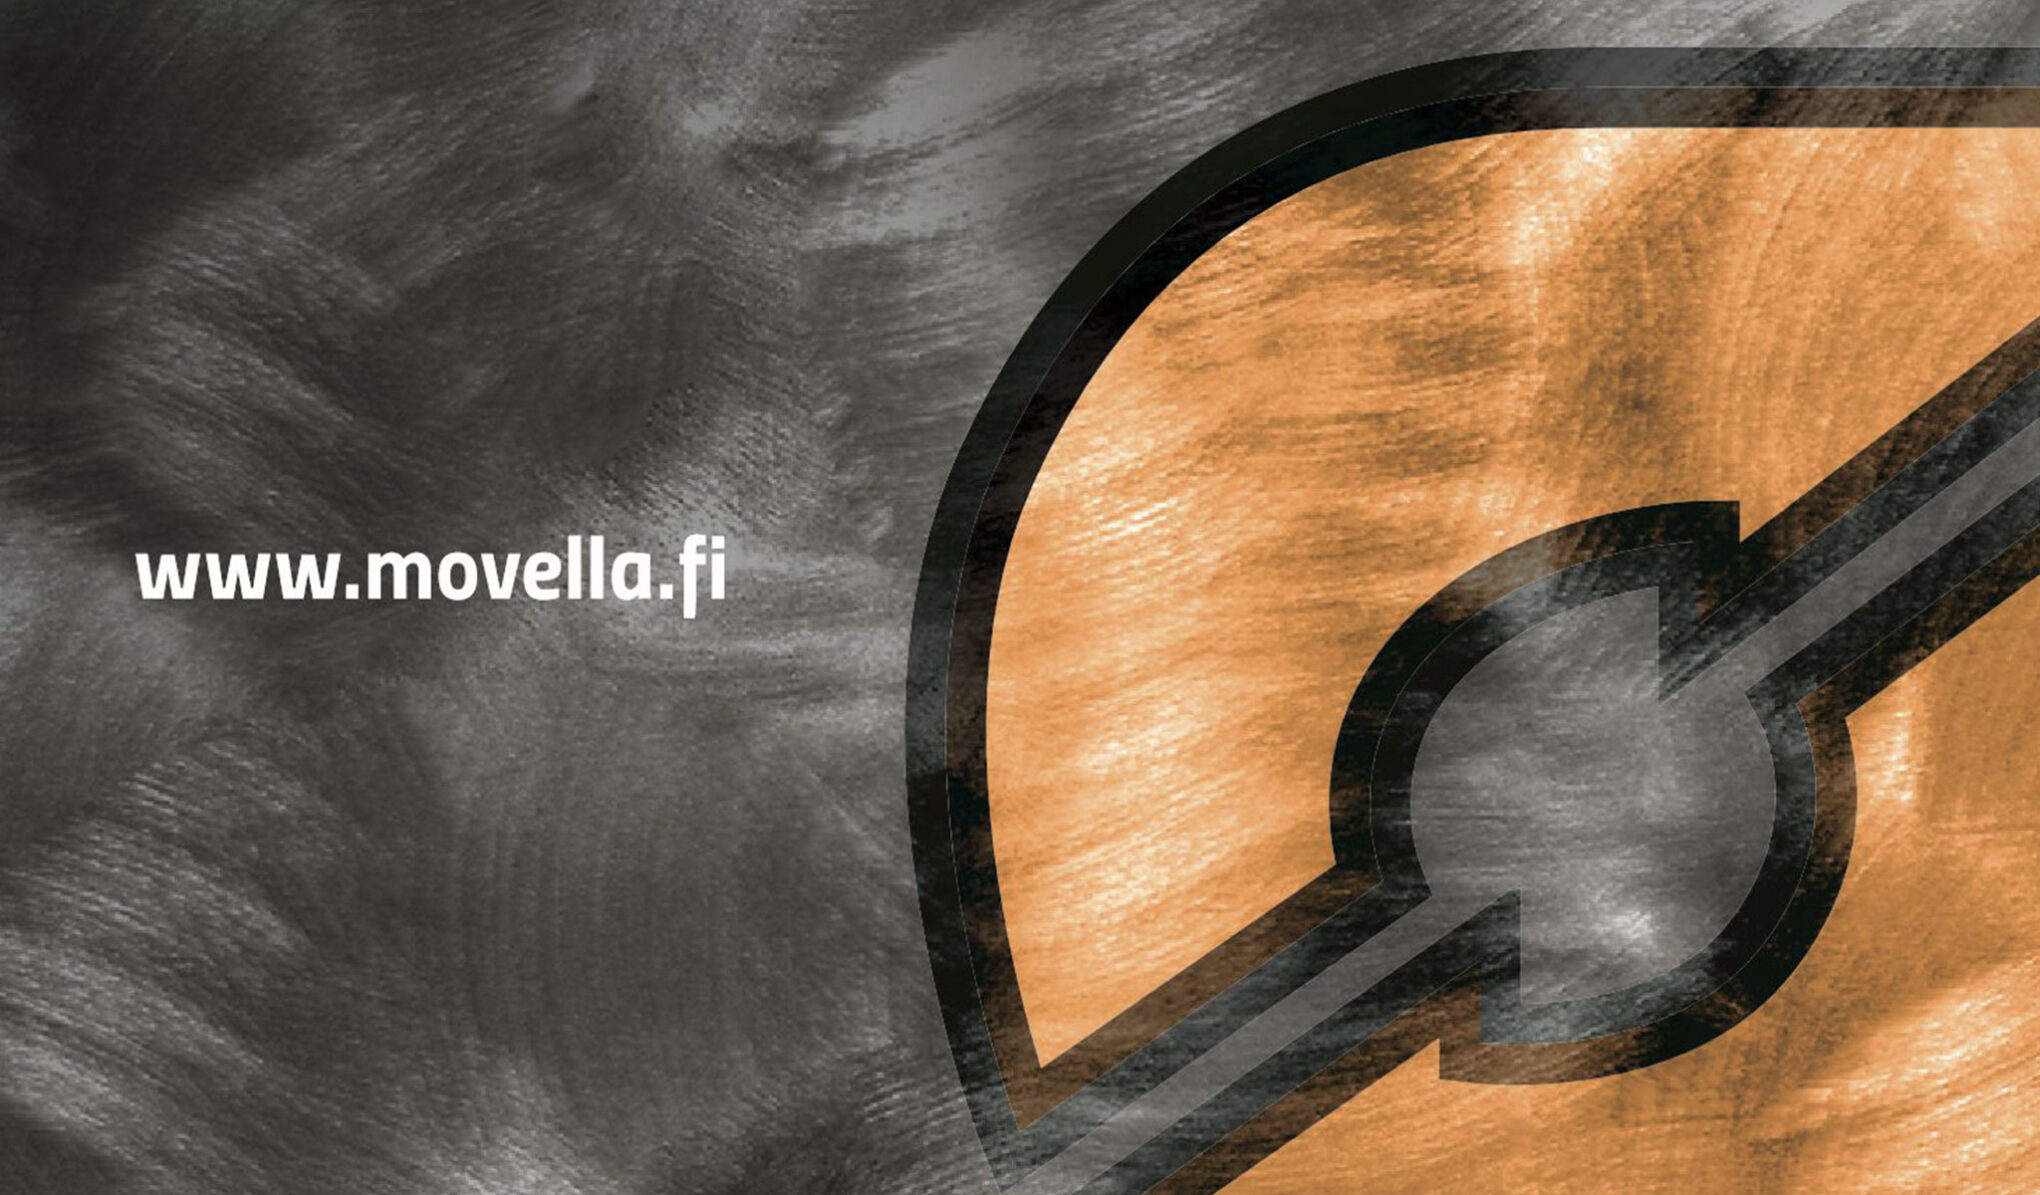 Graphic Displaying the Movella Logo and Website Domain